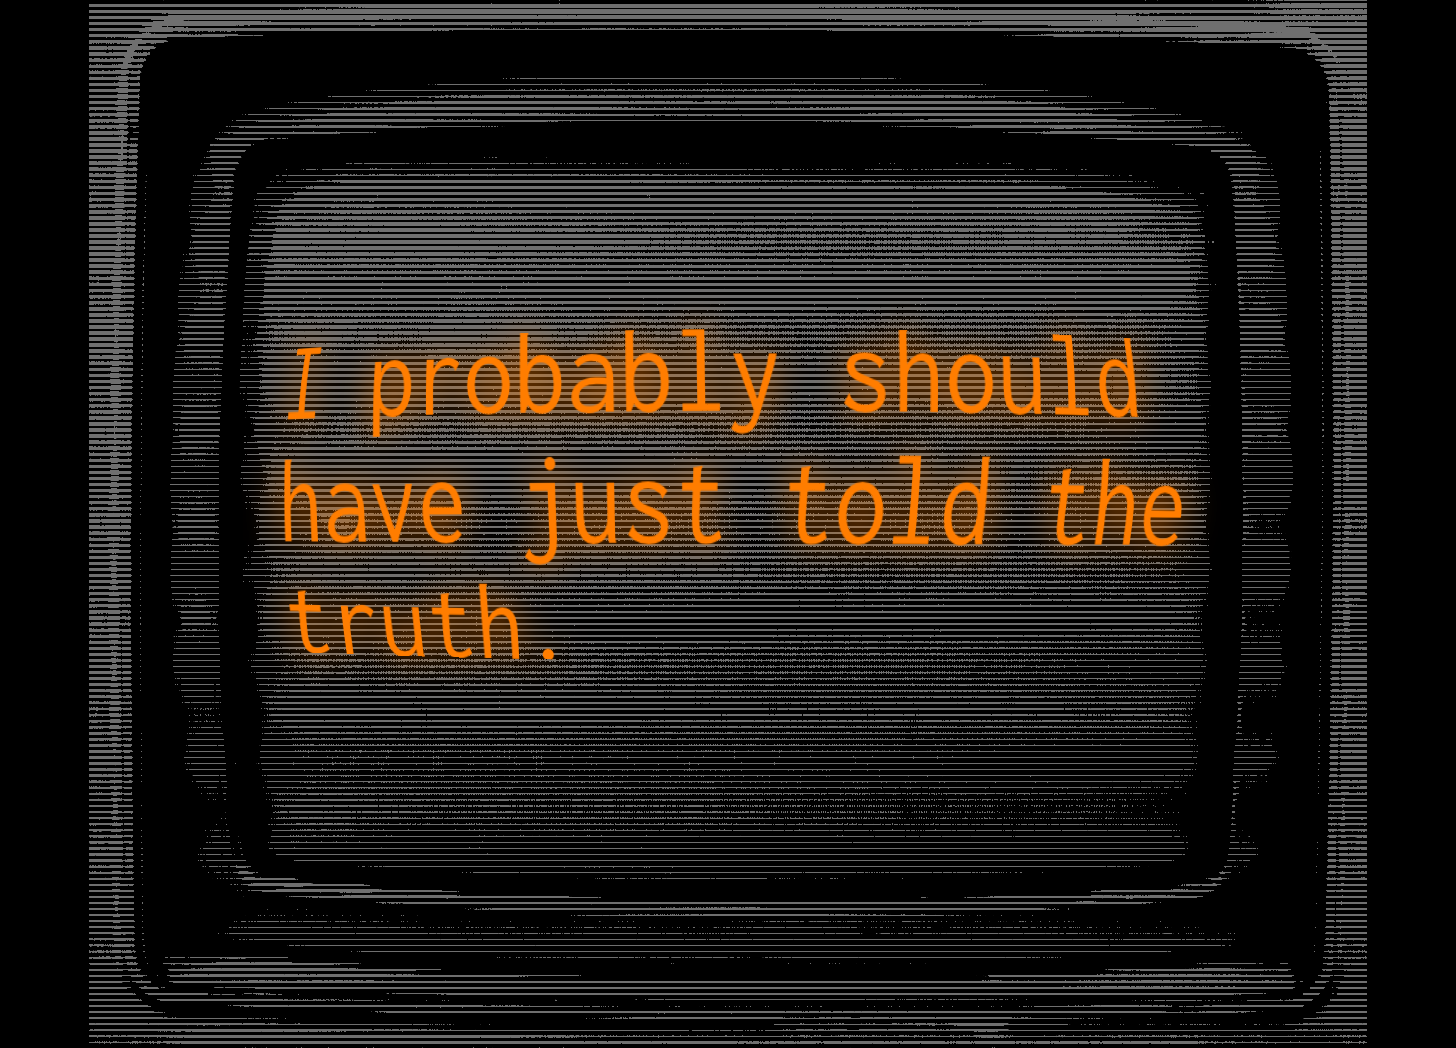 Pixelized monitor reads, "I probably should have just told the truth."